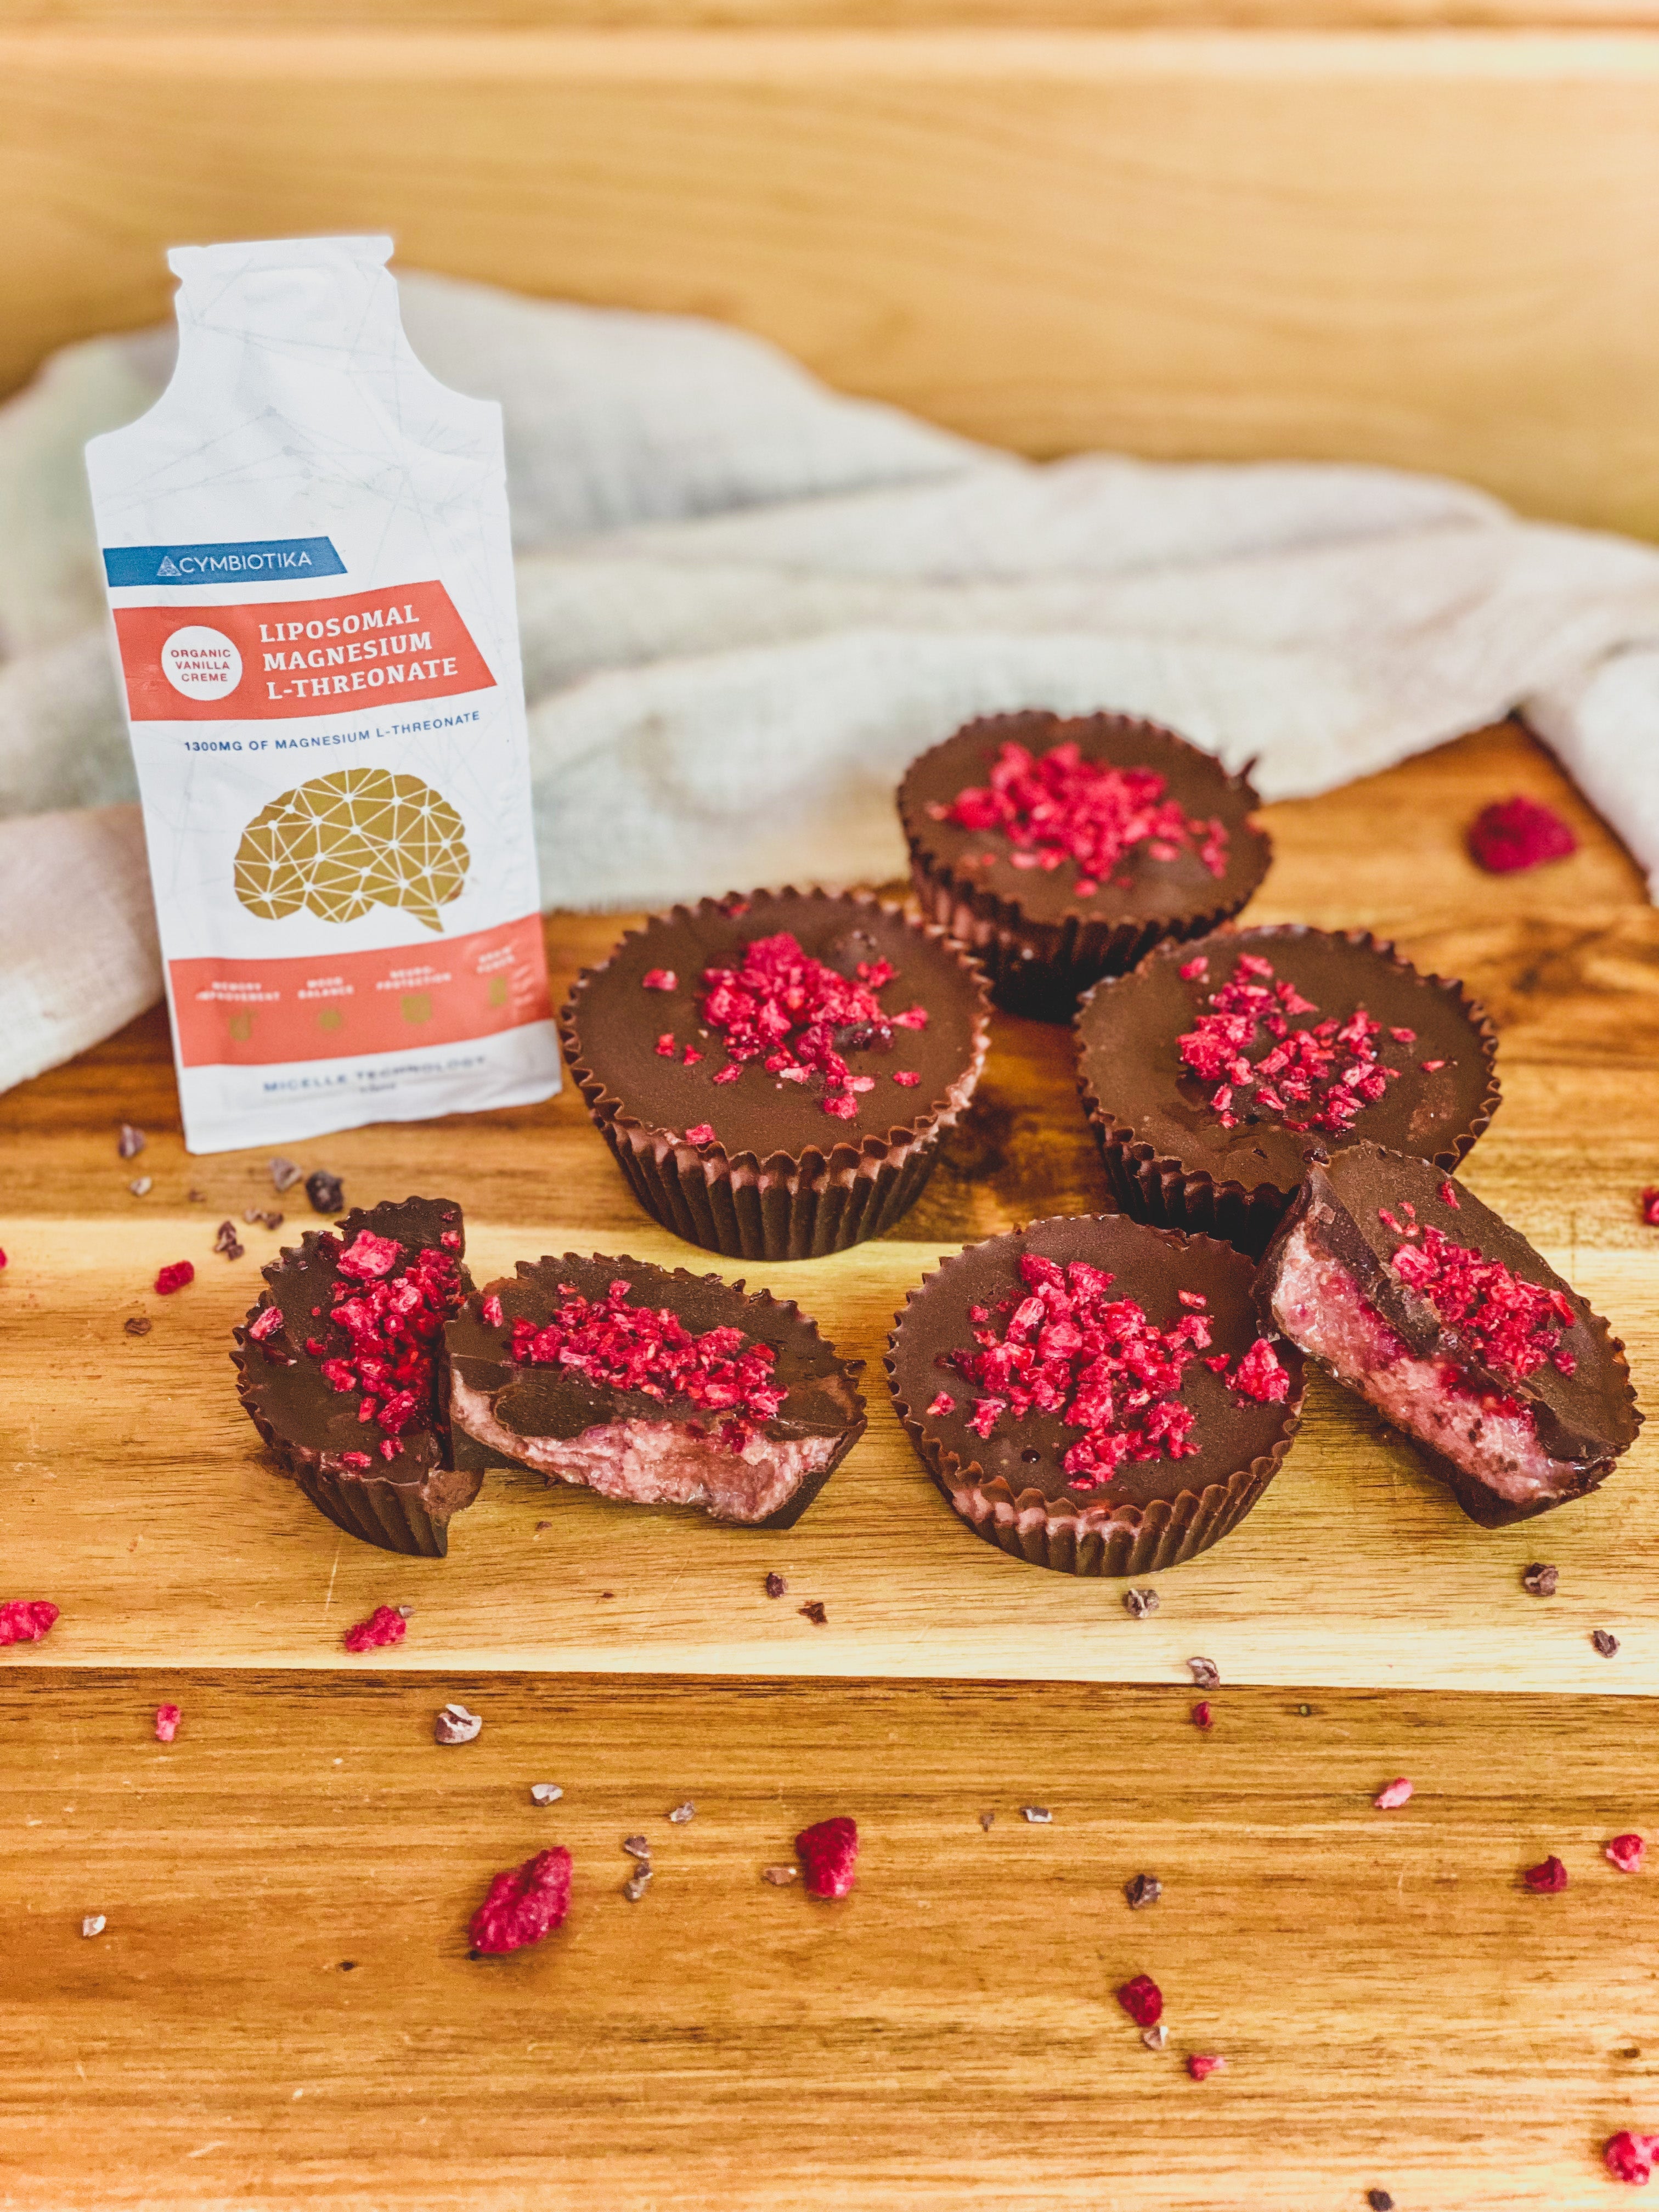 Raspberry Chocolate Cups with Magnesium L-Threonate